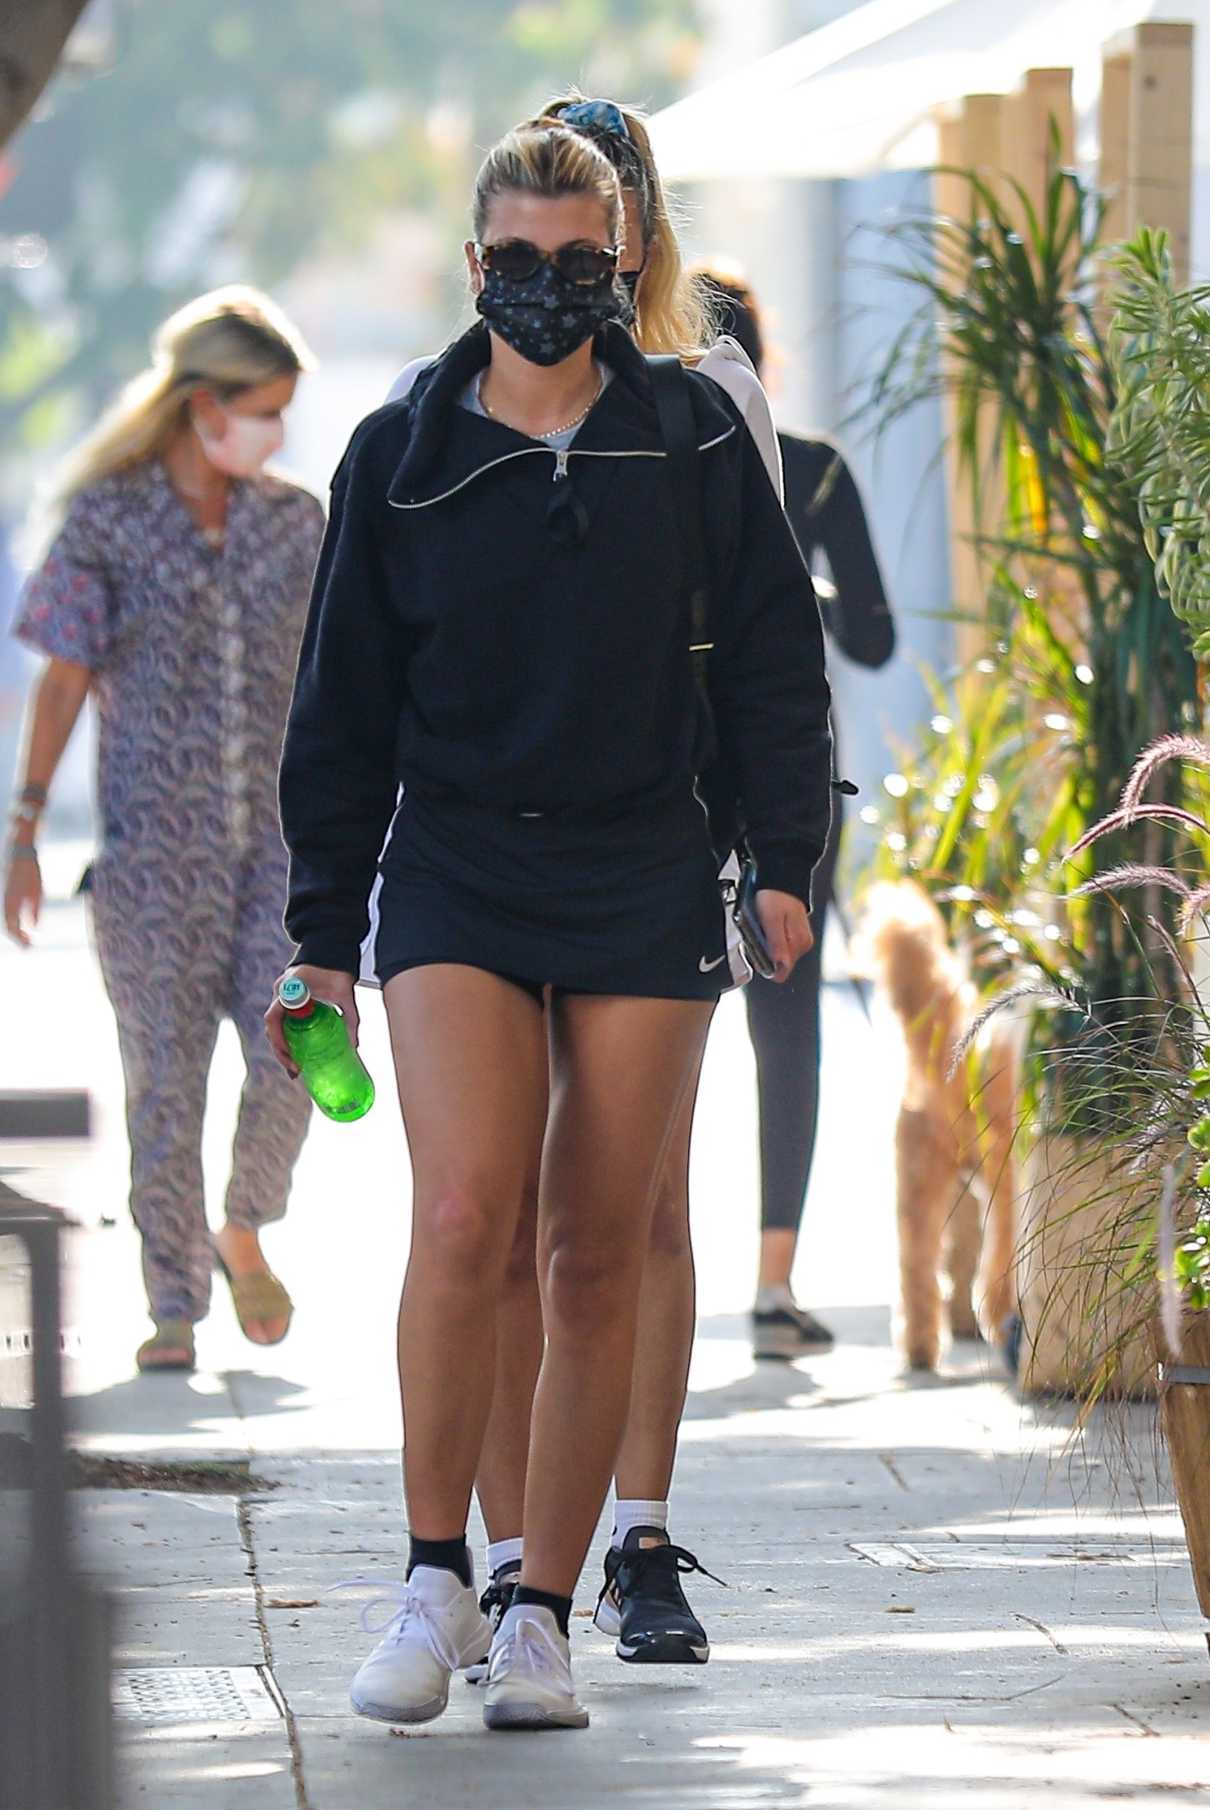 Sofia Richie in a Black Protective Mask